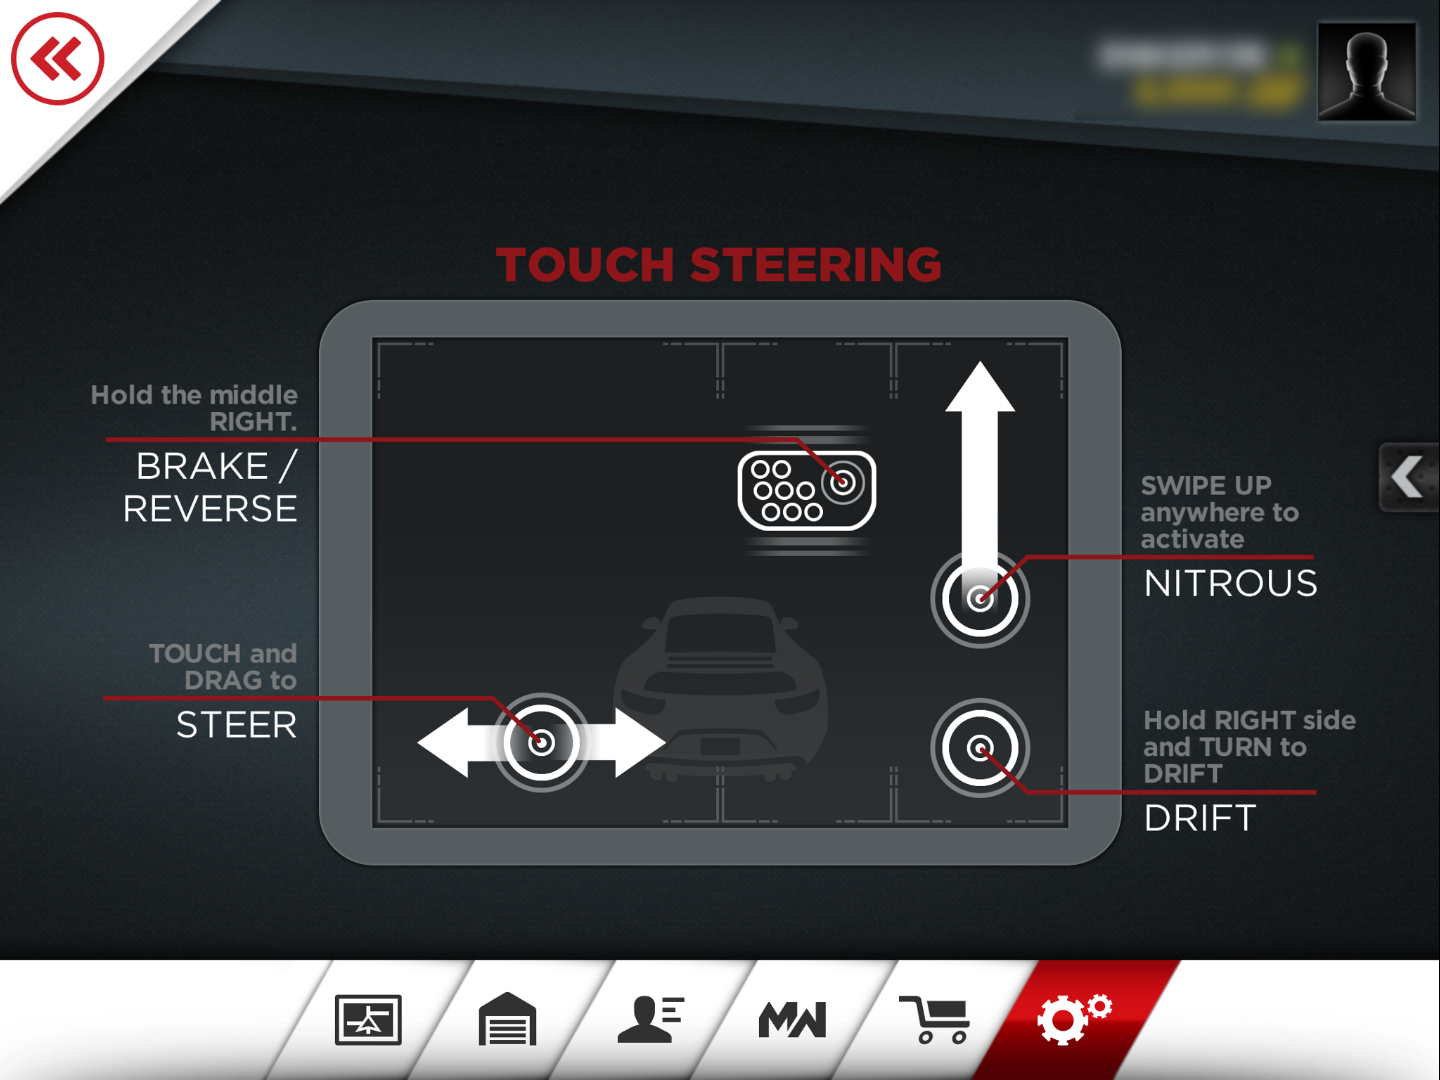 Need for Speed Most Wanted screen shot of Touch Steering controls showing how the game splits up the controls on two halves of the screen. The left half is only for steering and the right half has brake, nitrous and drift.